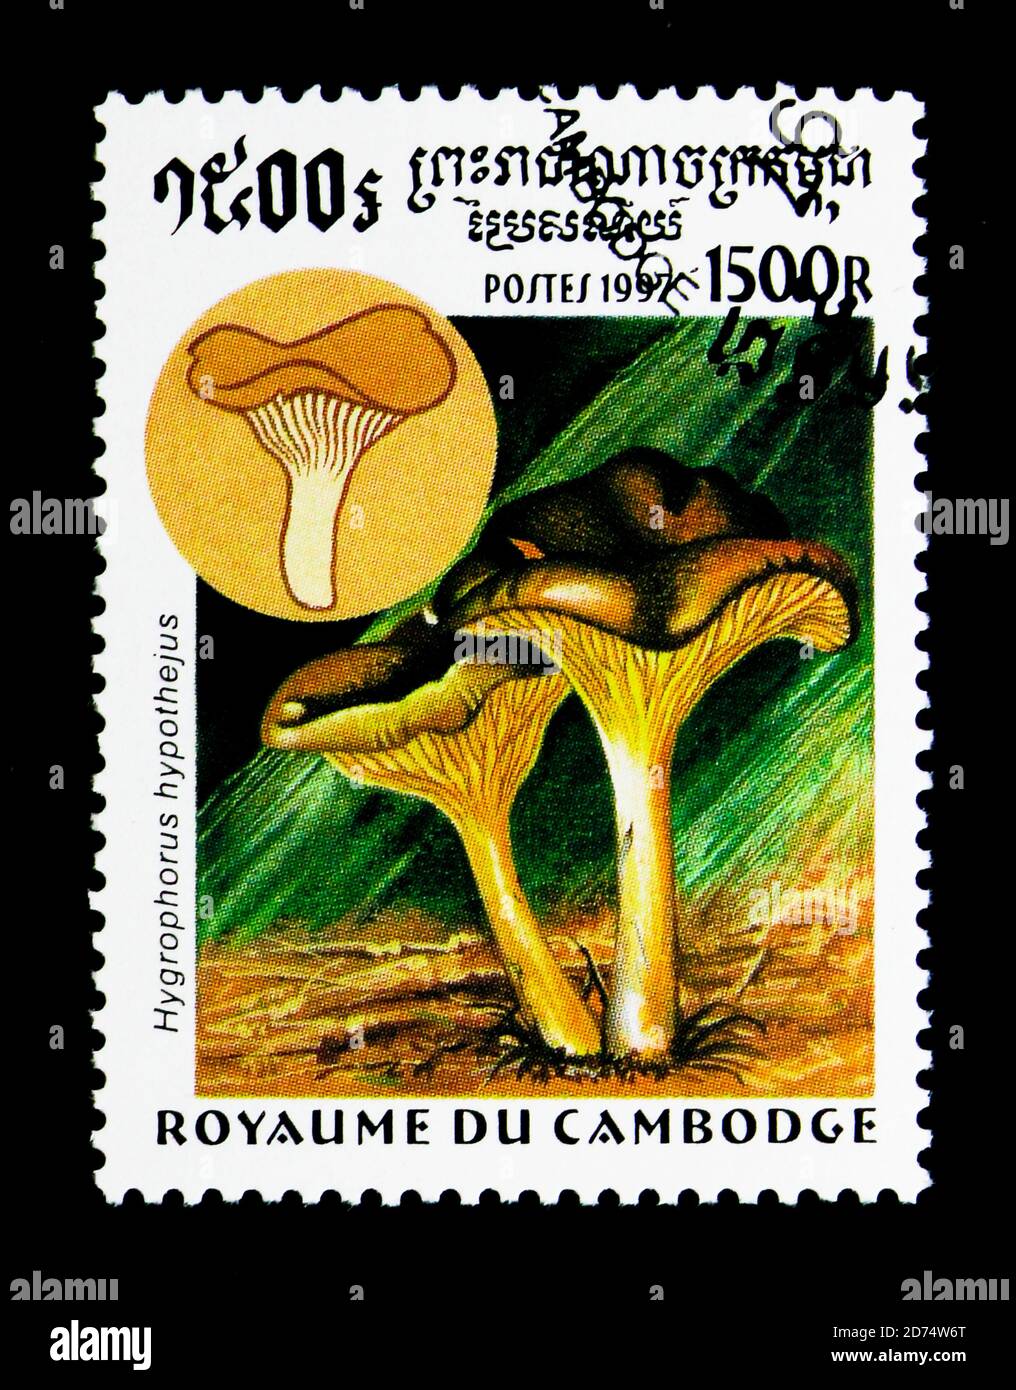 MOSCOW, RUSSIA - NOVEMBER 24, 2017: A stamp printed in Cambodia shows Hygrophorus hypothejus, Mushrooms serie, circa 1997 Stock Photo